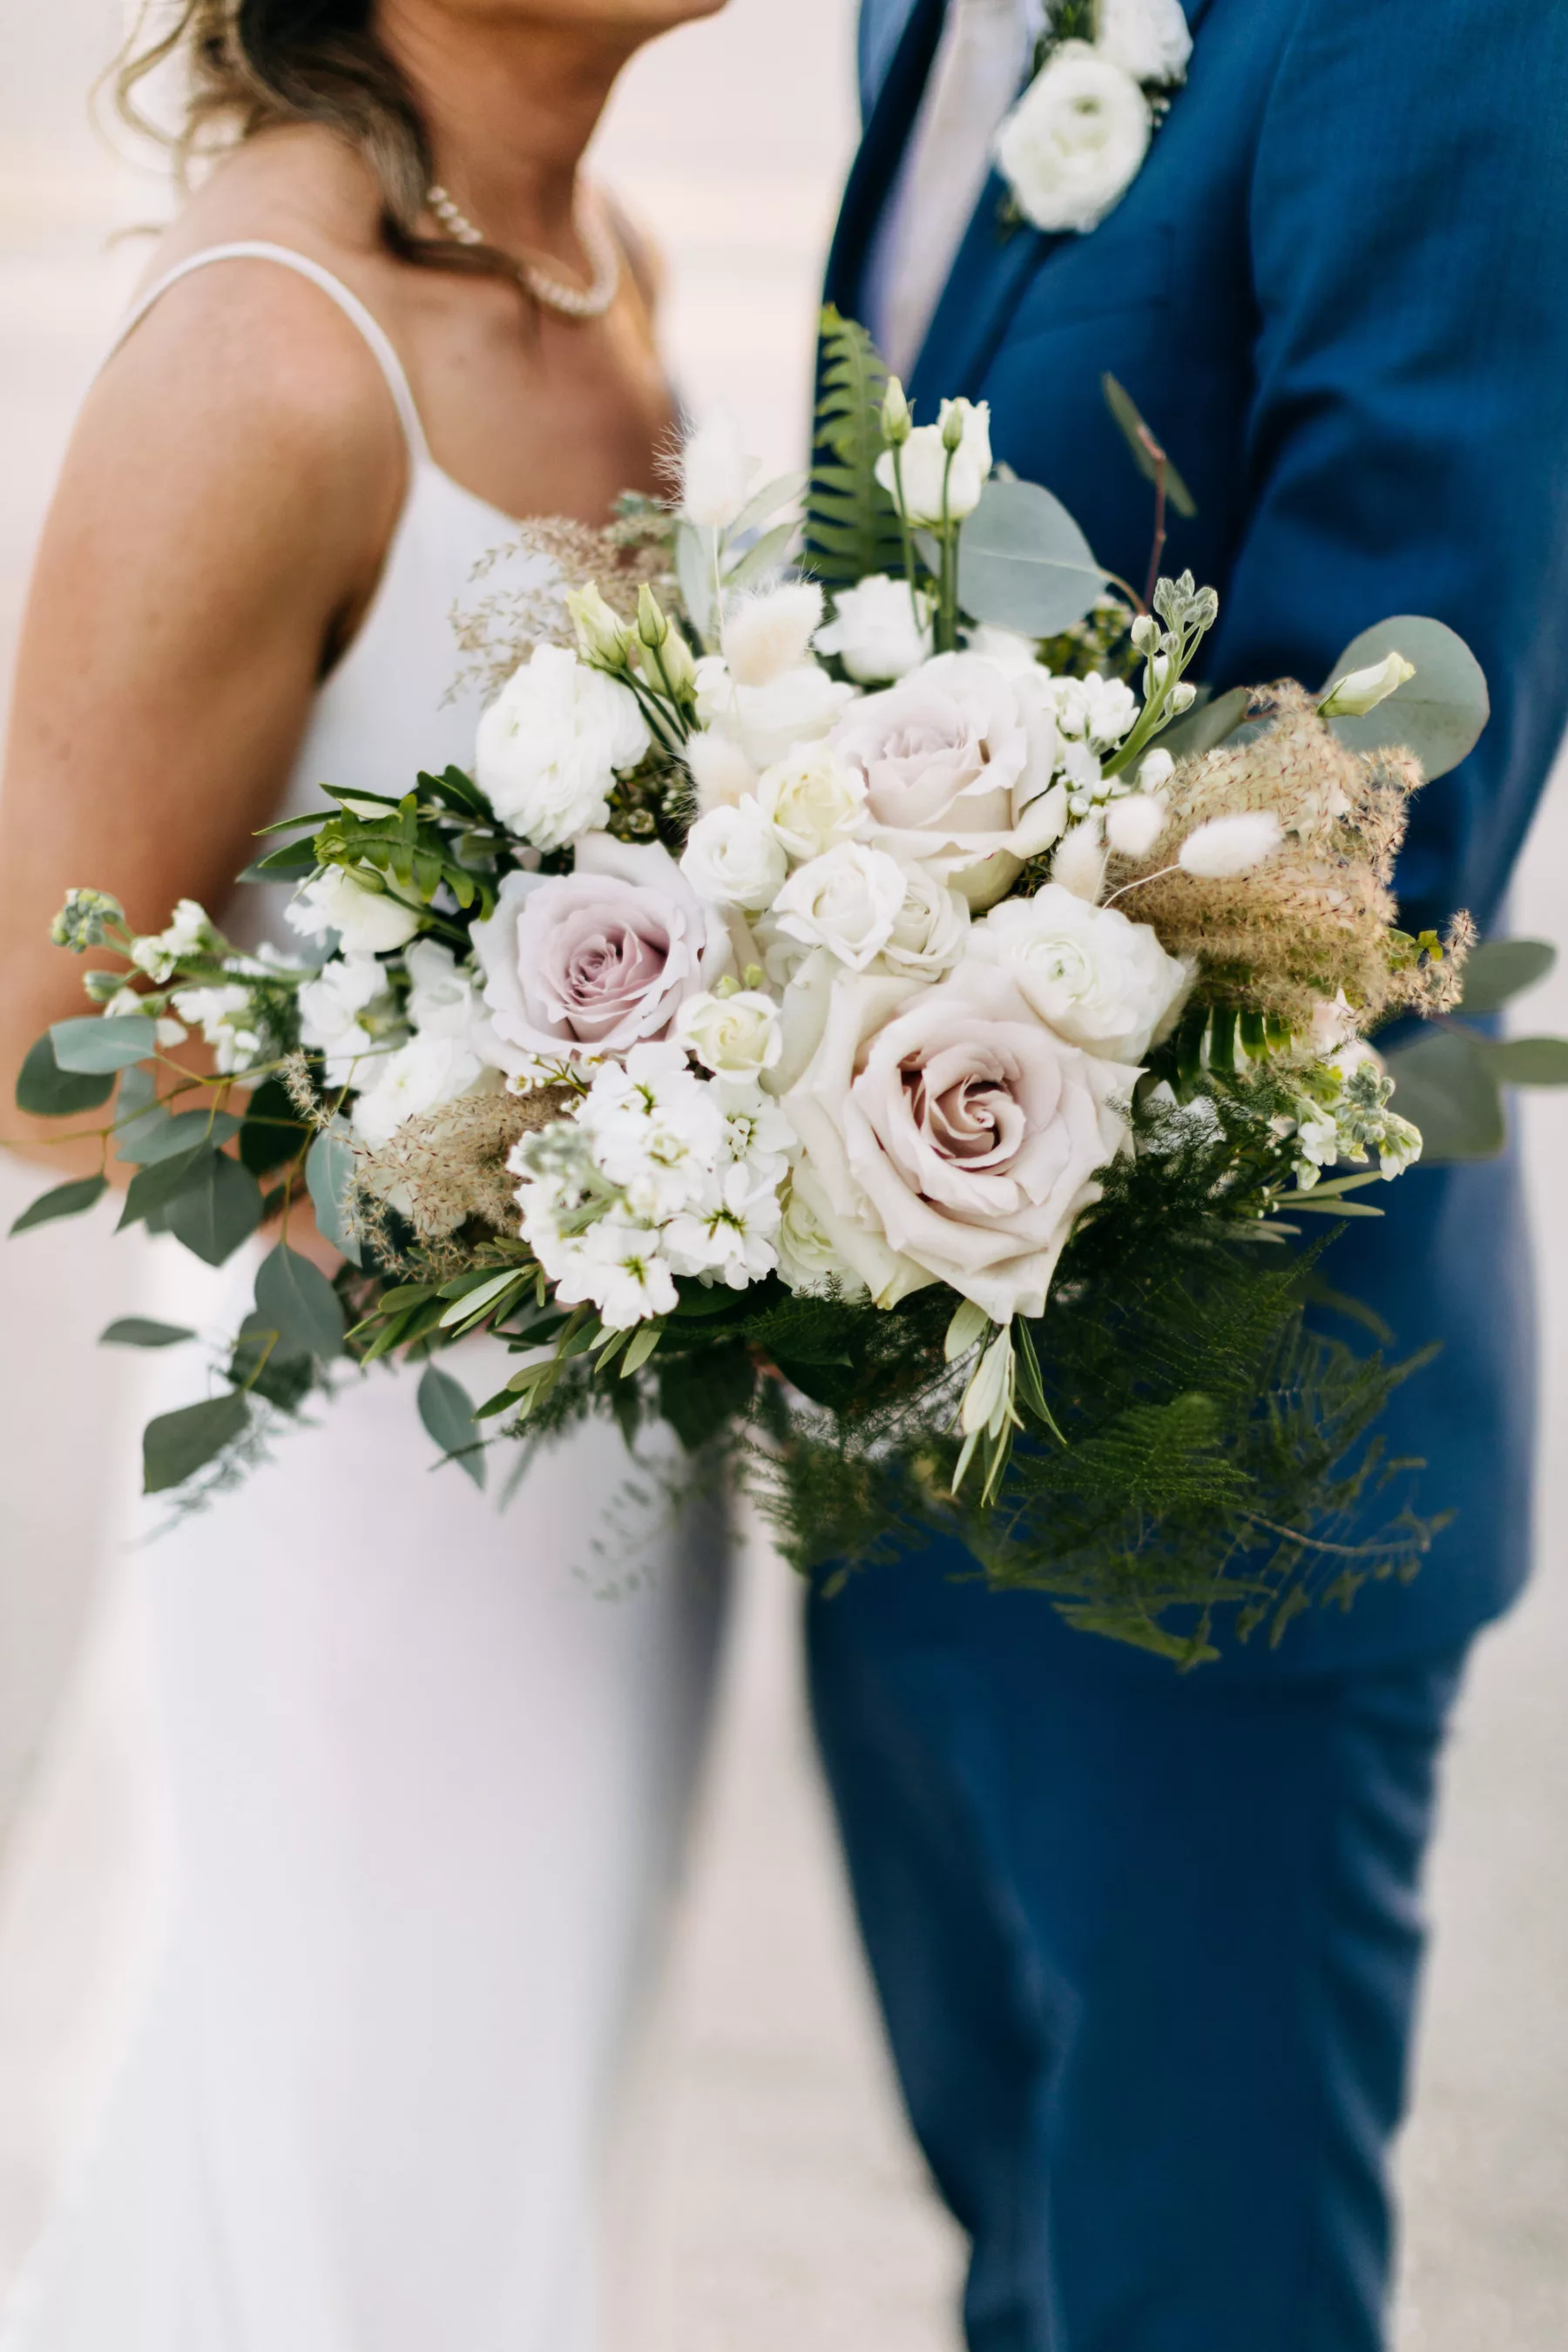 Romantic Pastel Dusty Purple and White Roses, Fern, and Greenery Beach Wedding Bouquet Ideas